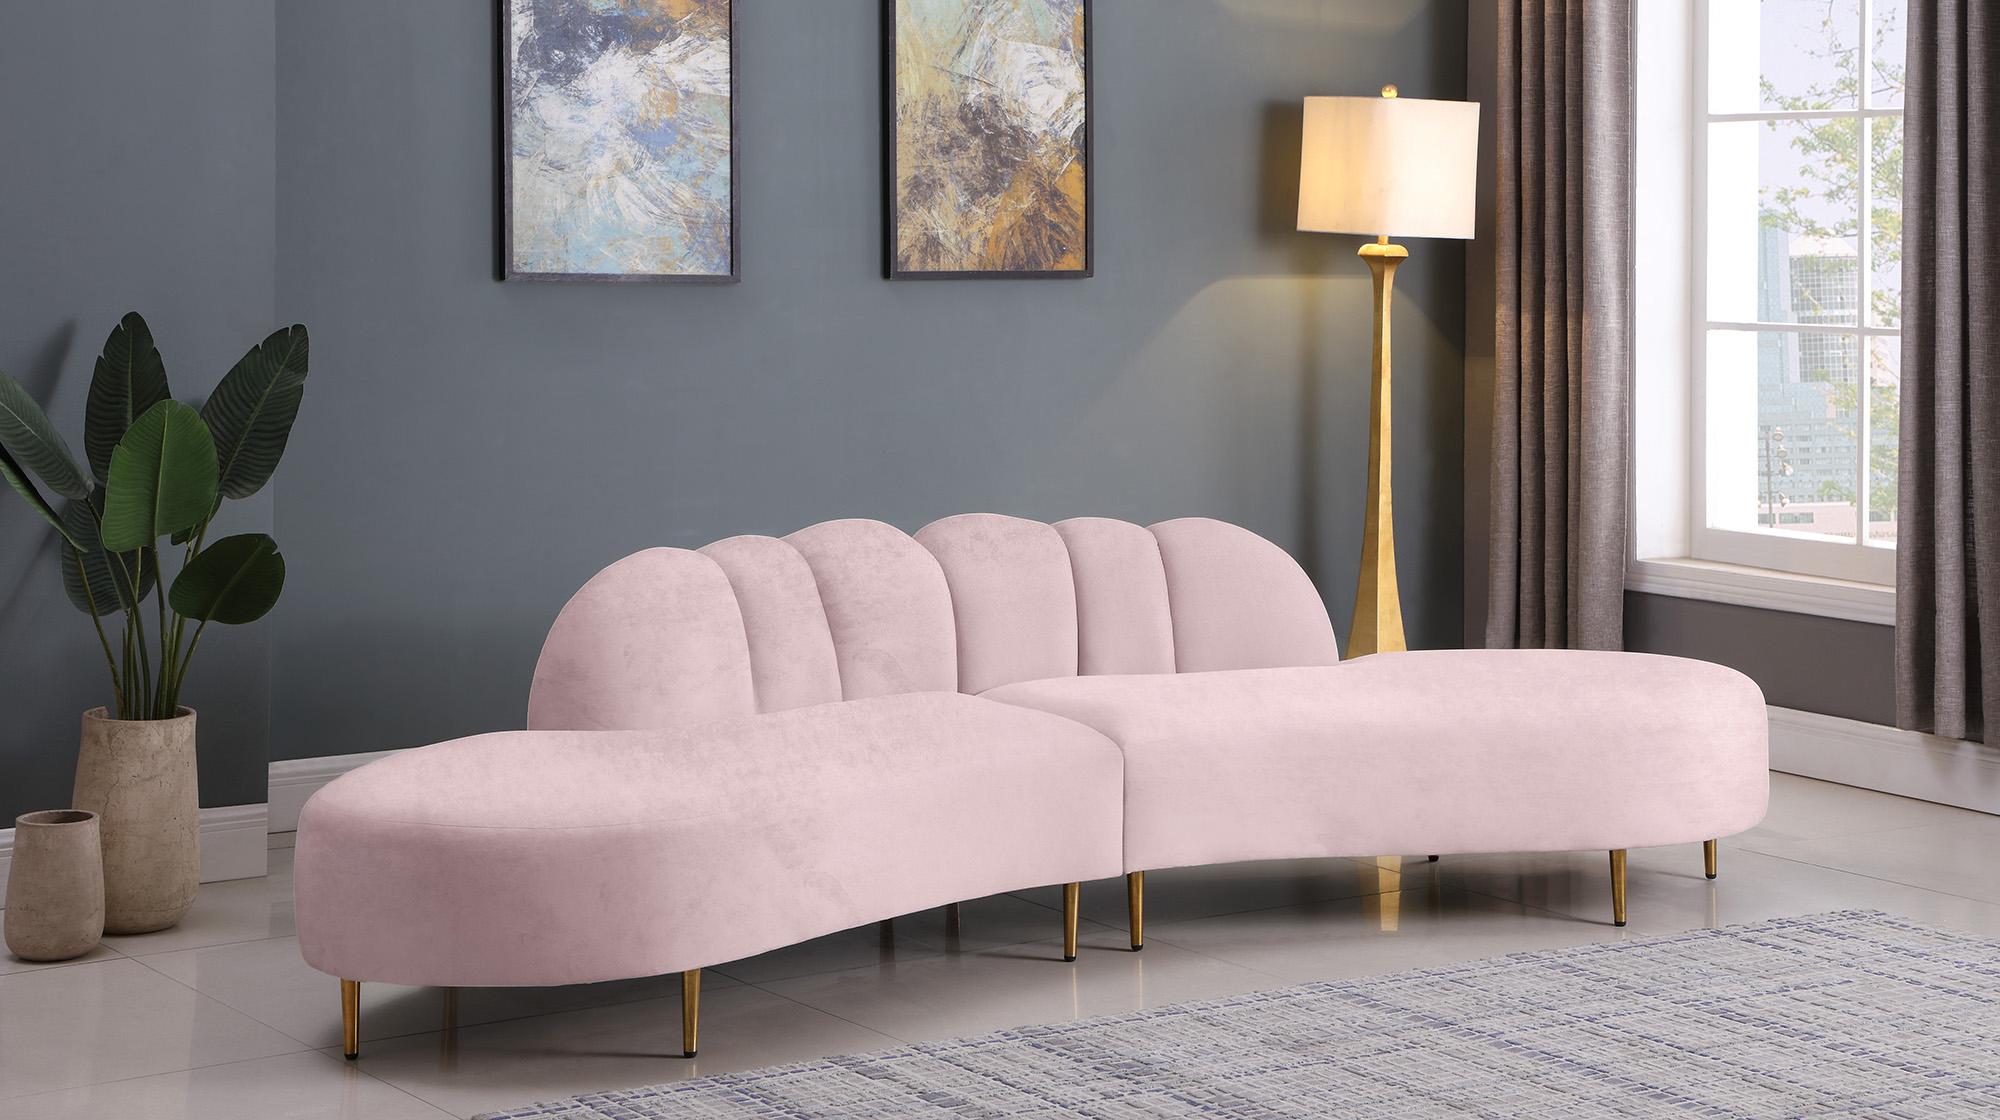 

    
Meridian Furniture DIVINE 618Pink Sectional Sofa Pink 618Pink-Sectional
